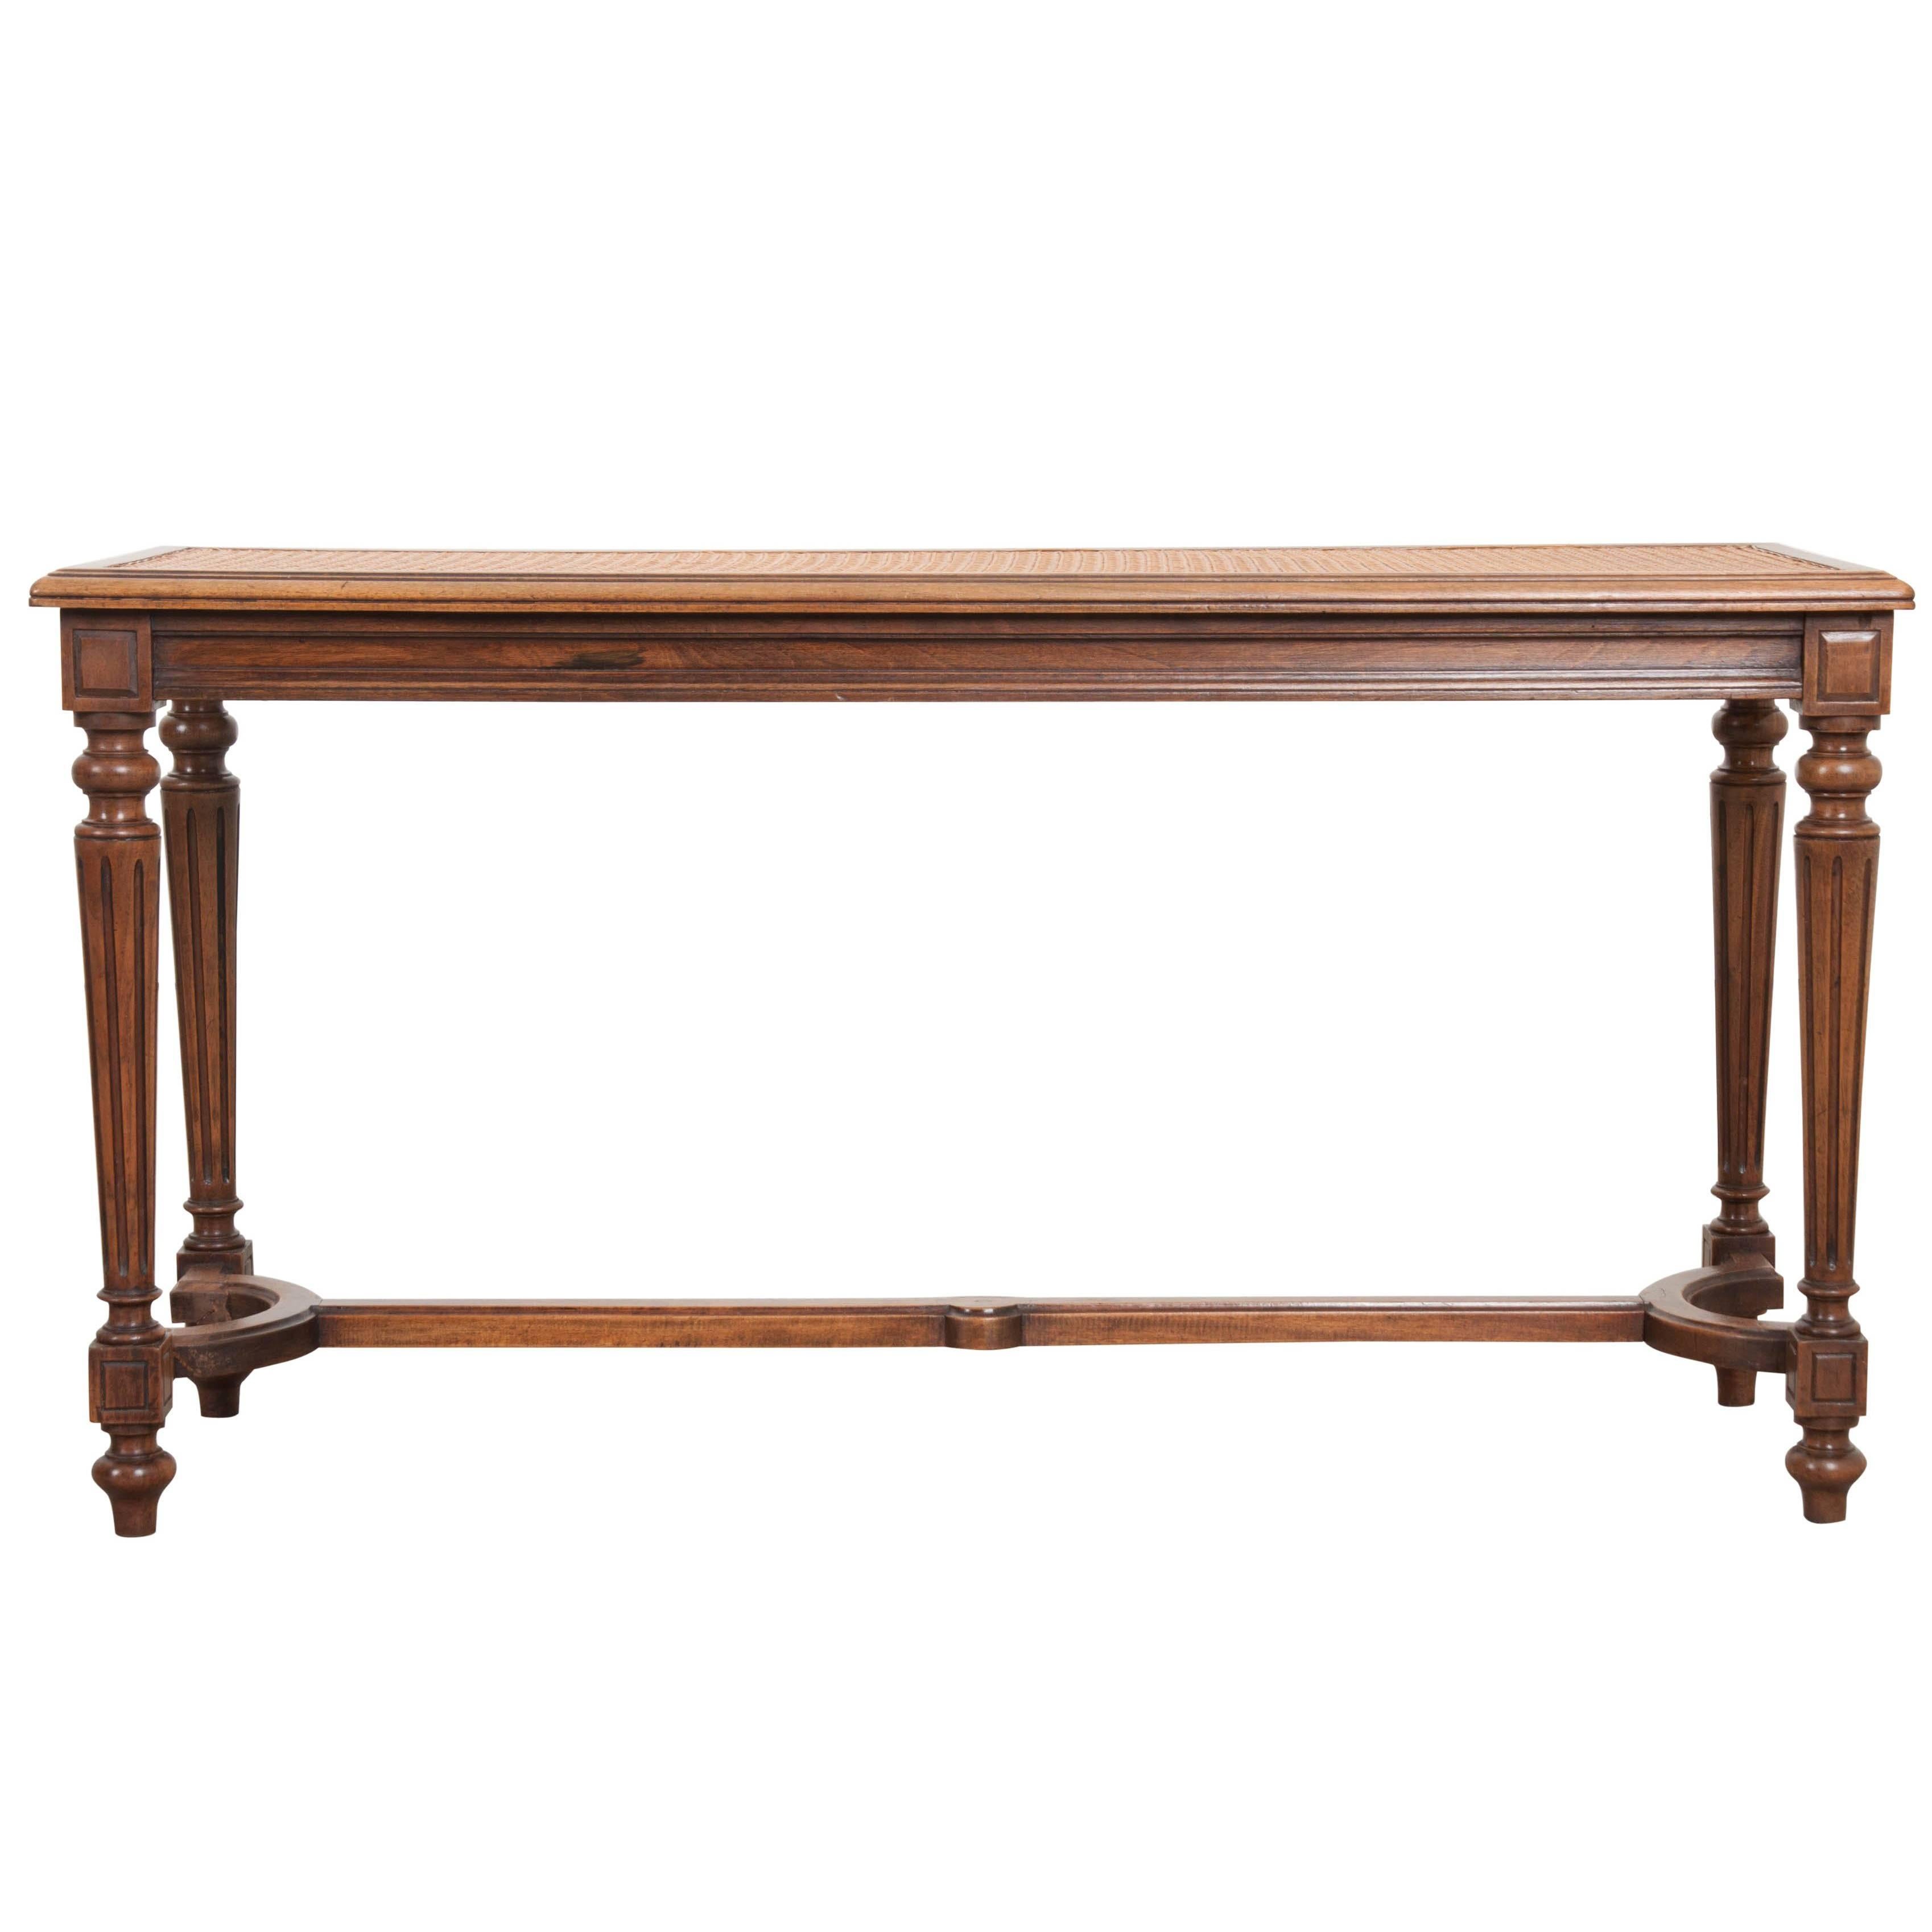 French 19th Century Cane and Walnut Louis XVI Bench